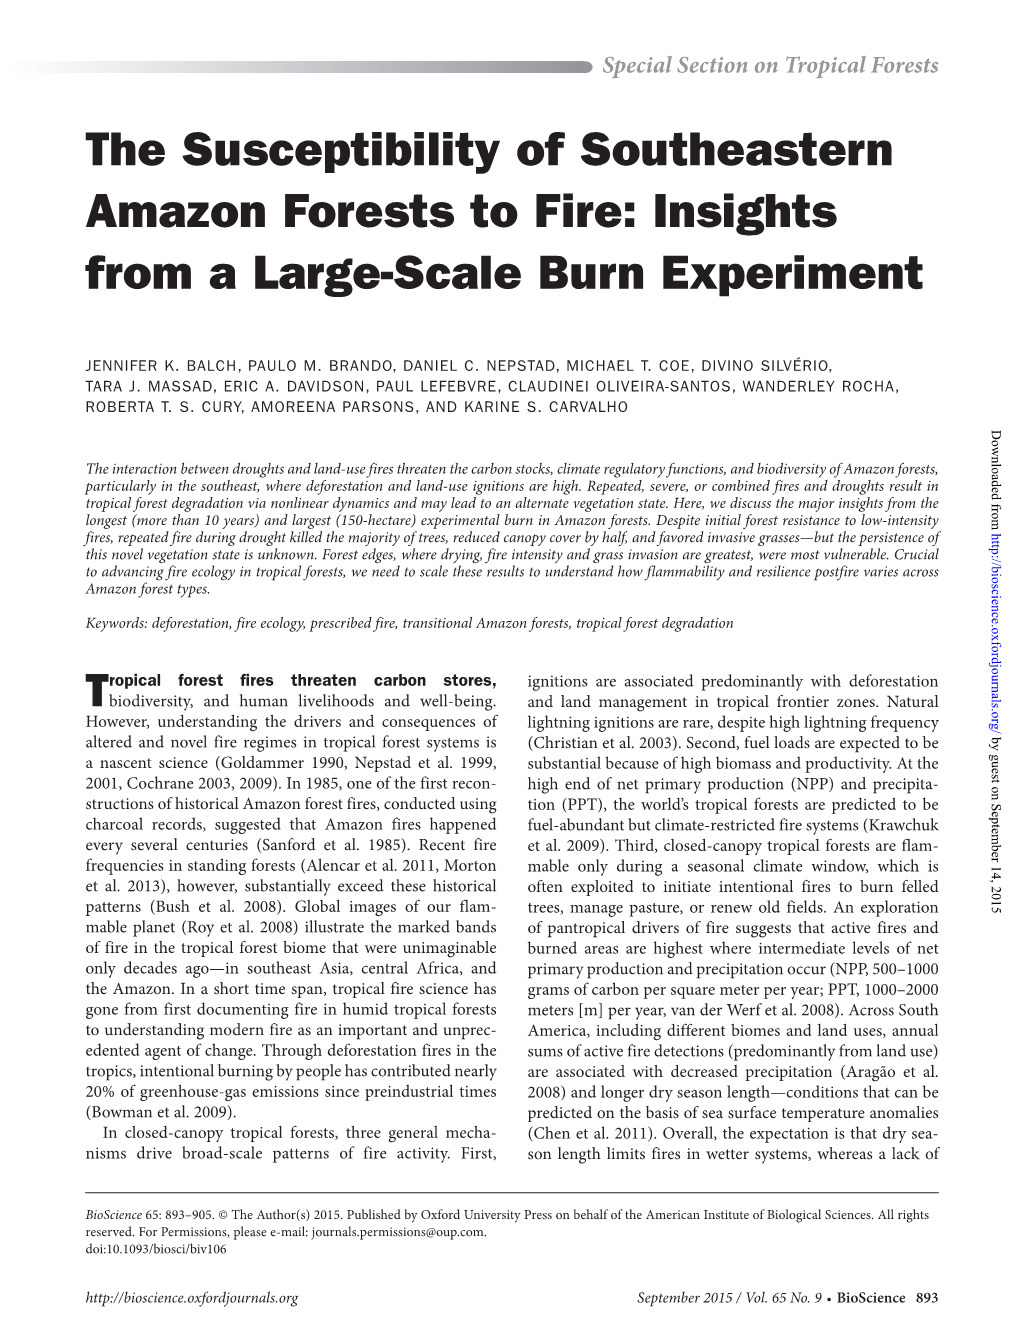 The Susceptibility of Southeastern Amazon Forests to Fire: Insights from a Large-Scale Burn Experiment